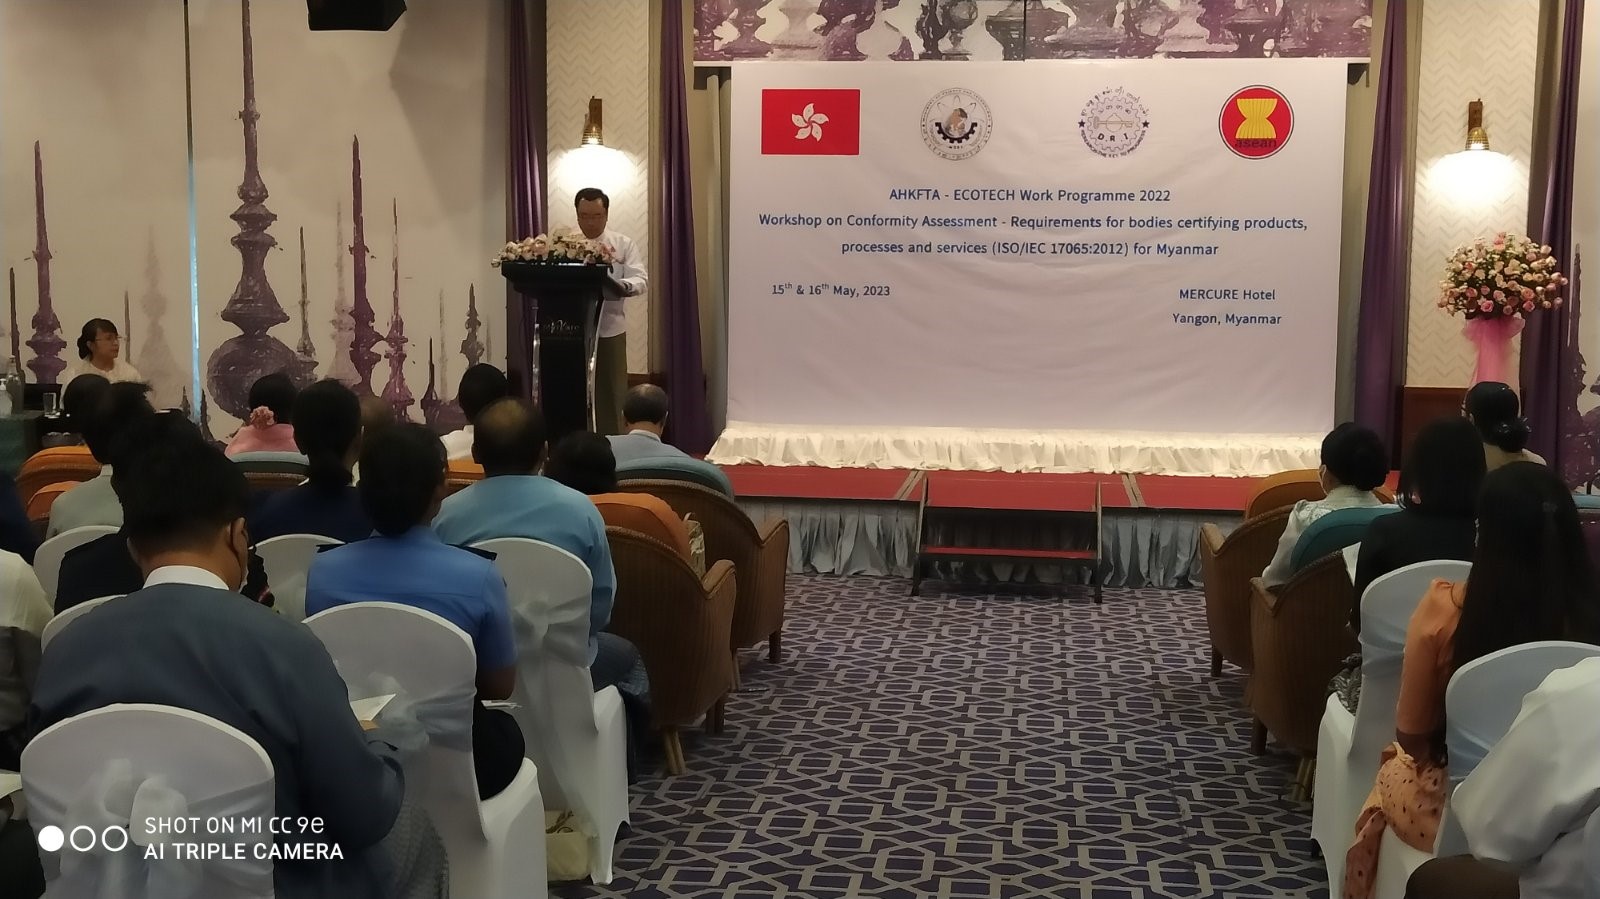 Third “Workshop on Conformity Assessment-Requirements for bodies certifying products, processes and services (ISO/IEC 17065:2012) for Myanmar”